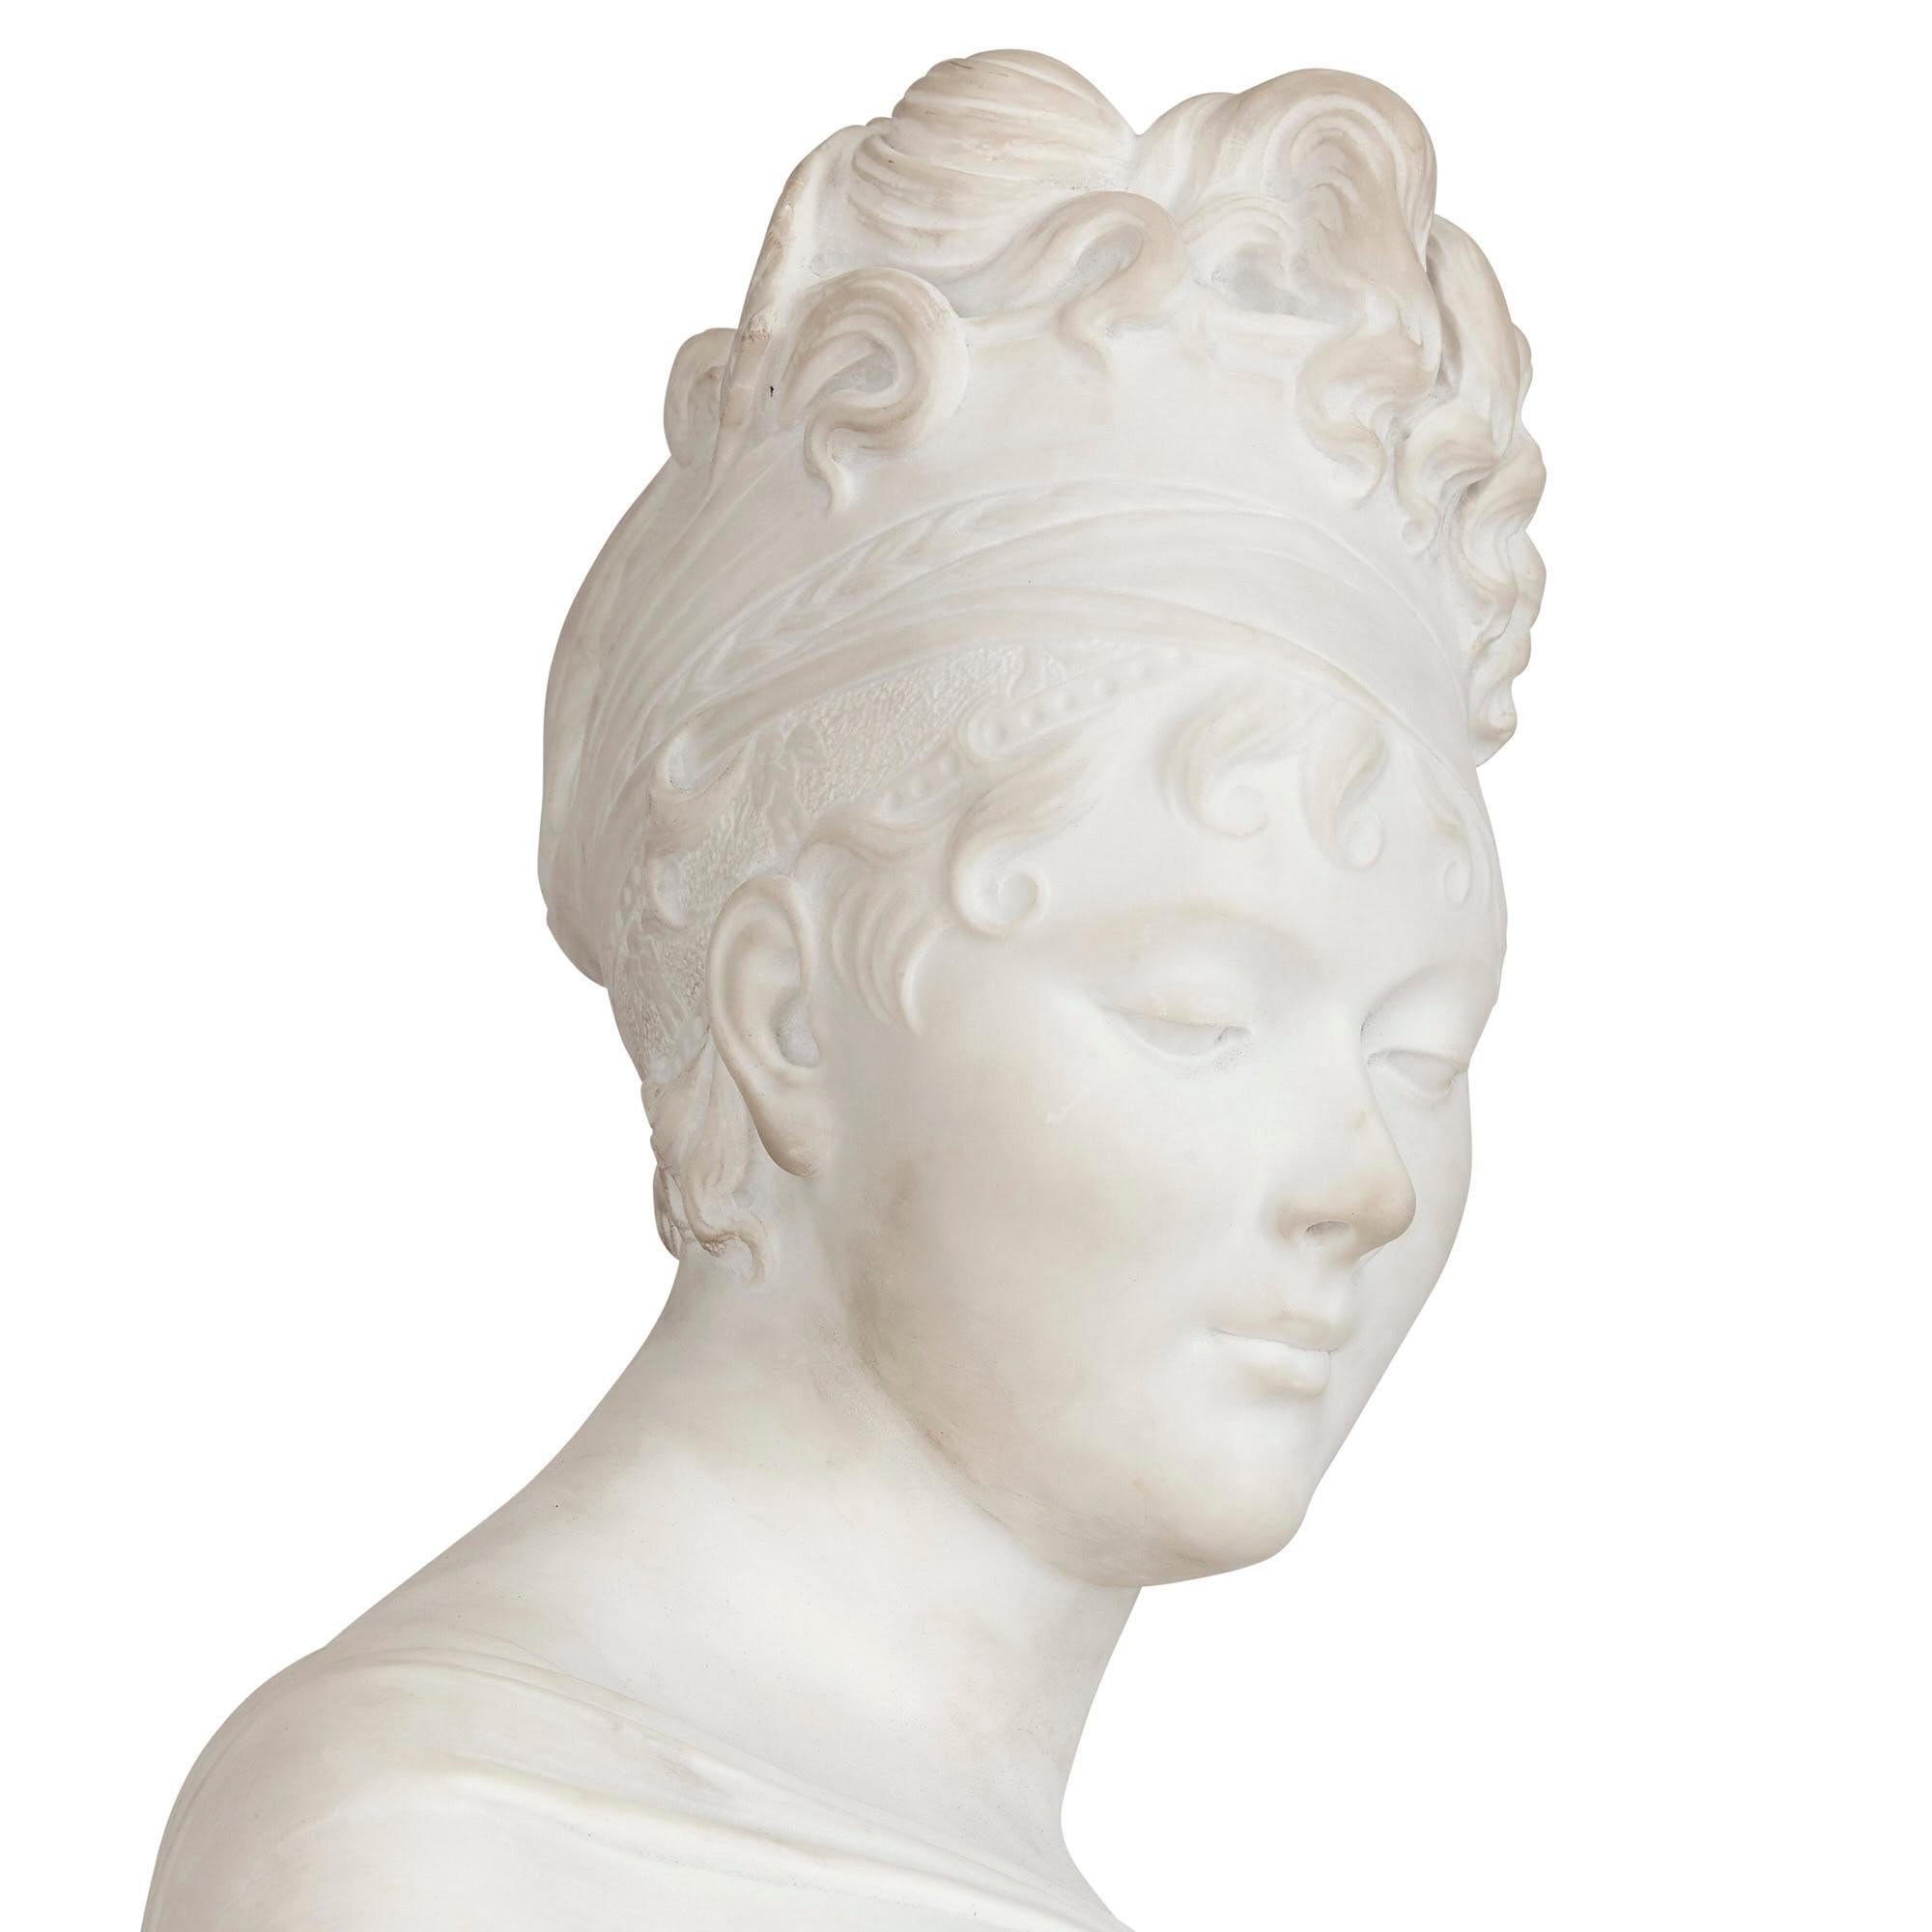 19th Century Neoclassical Style Marble Female Bust after Joseph Chinard For Sale